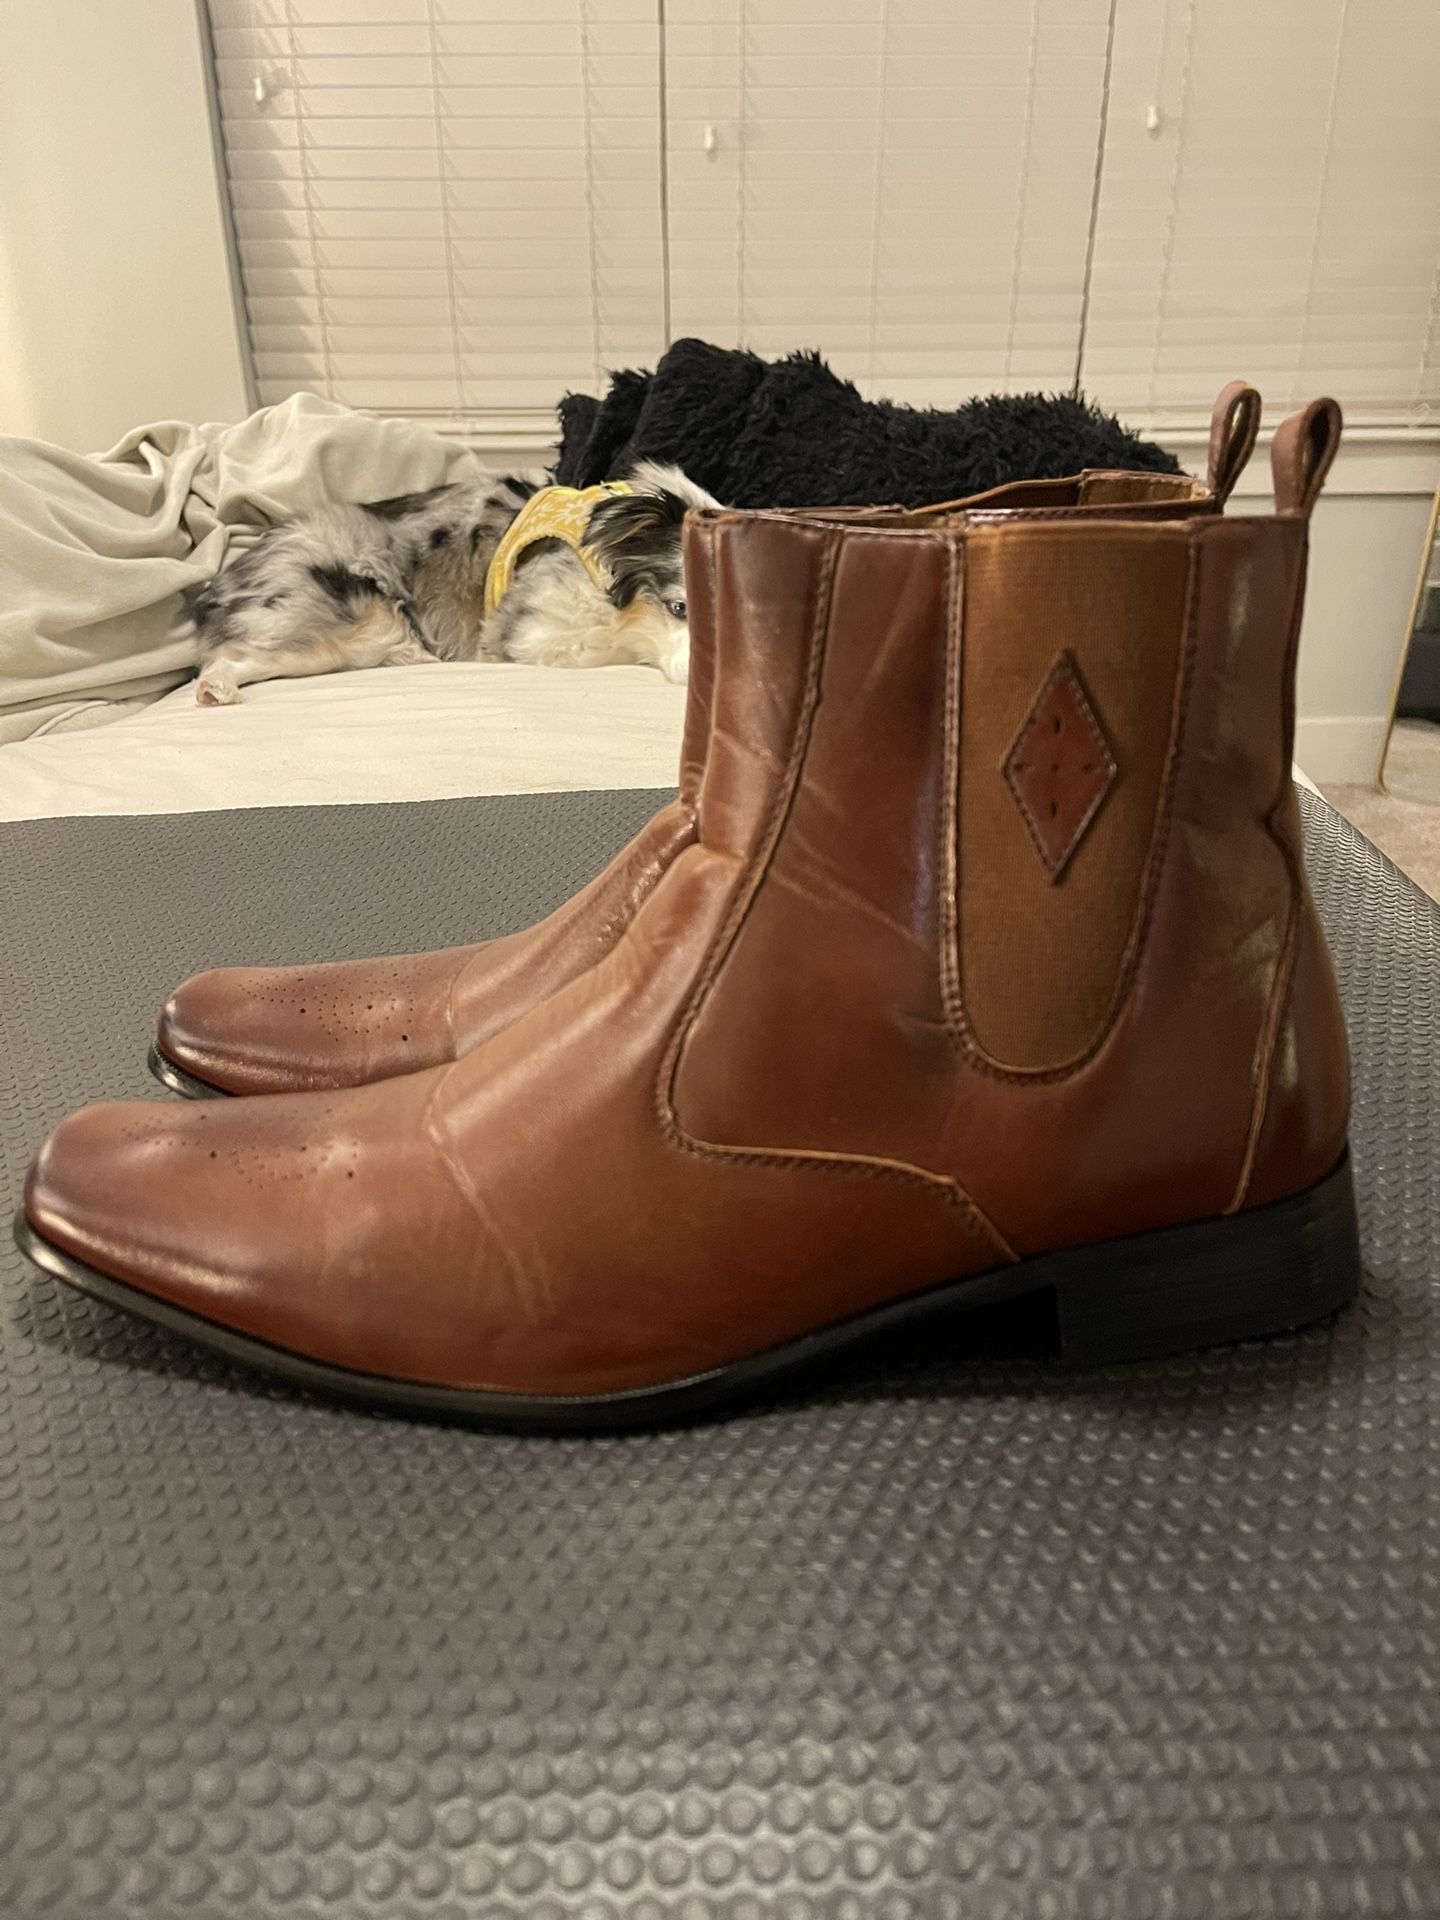 Men’s Brown Leather Boots Size 9.5